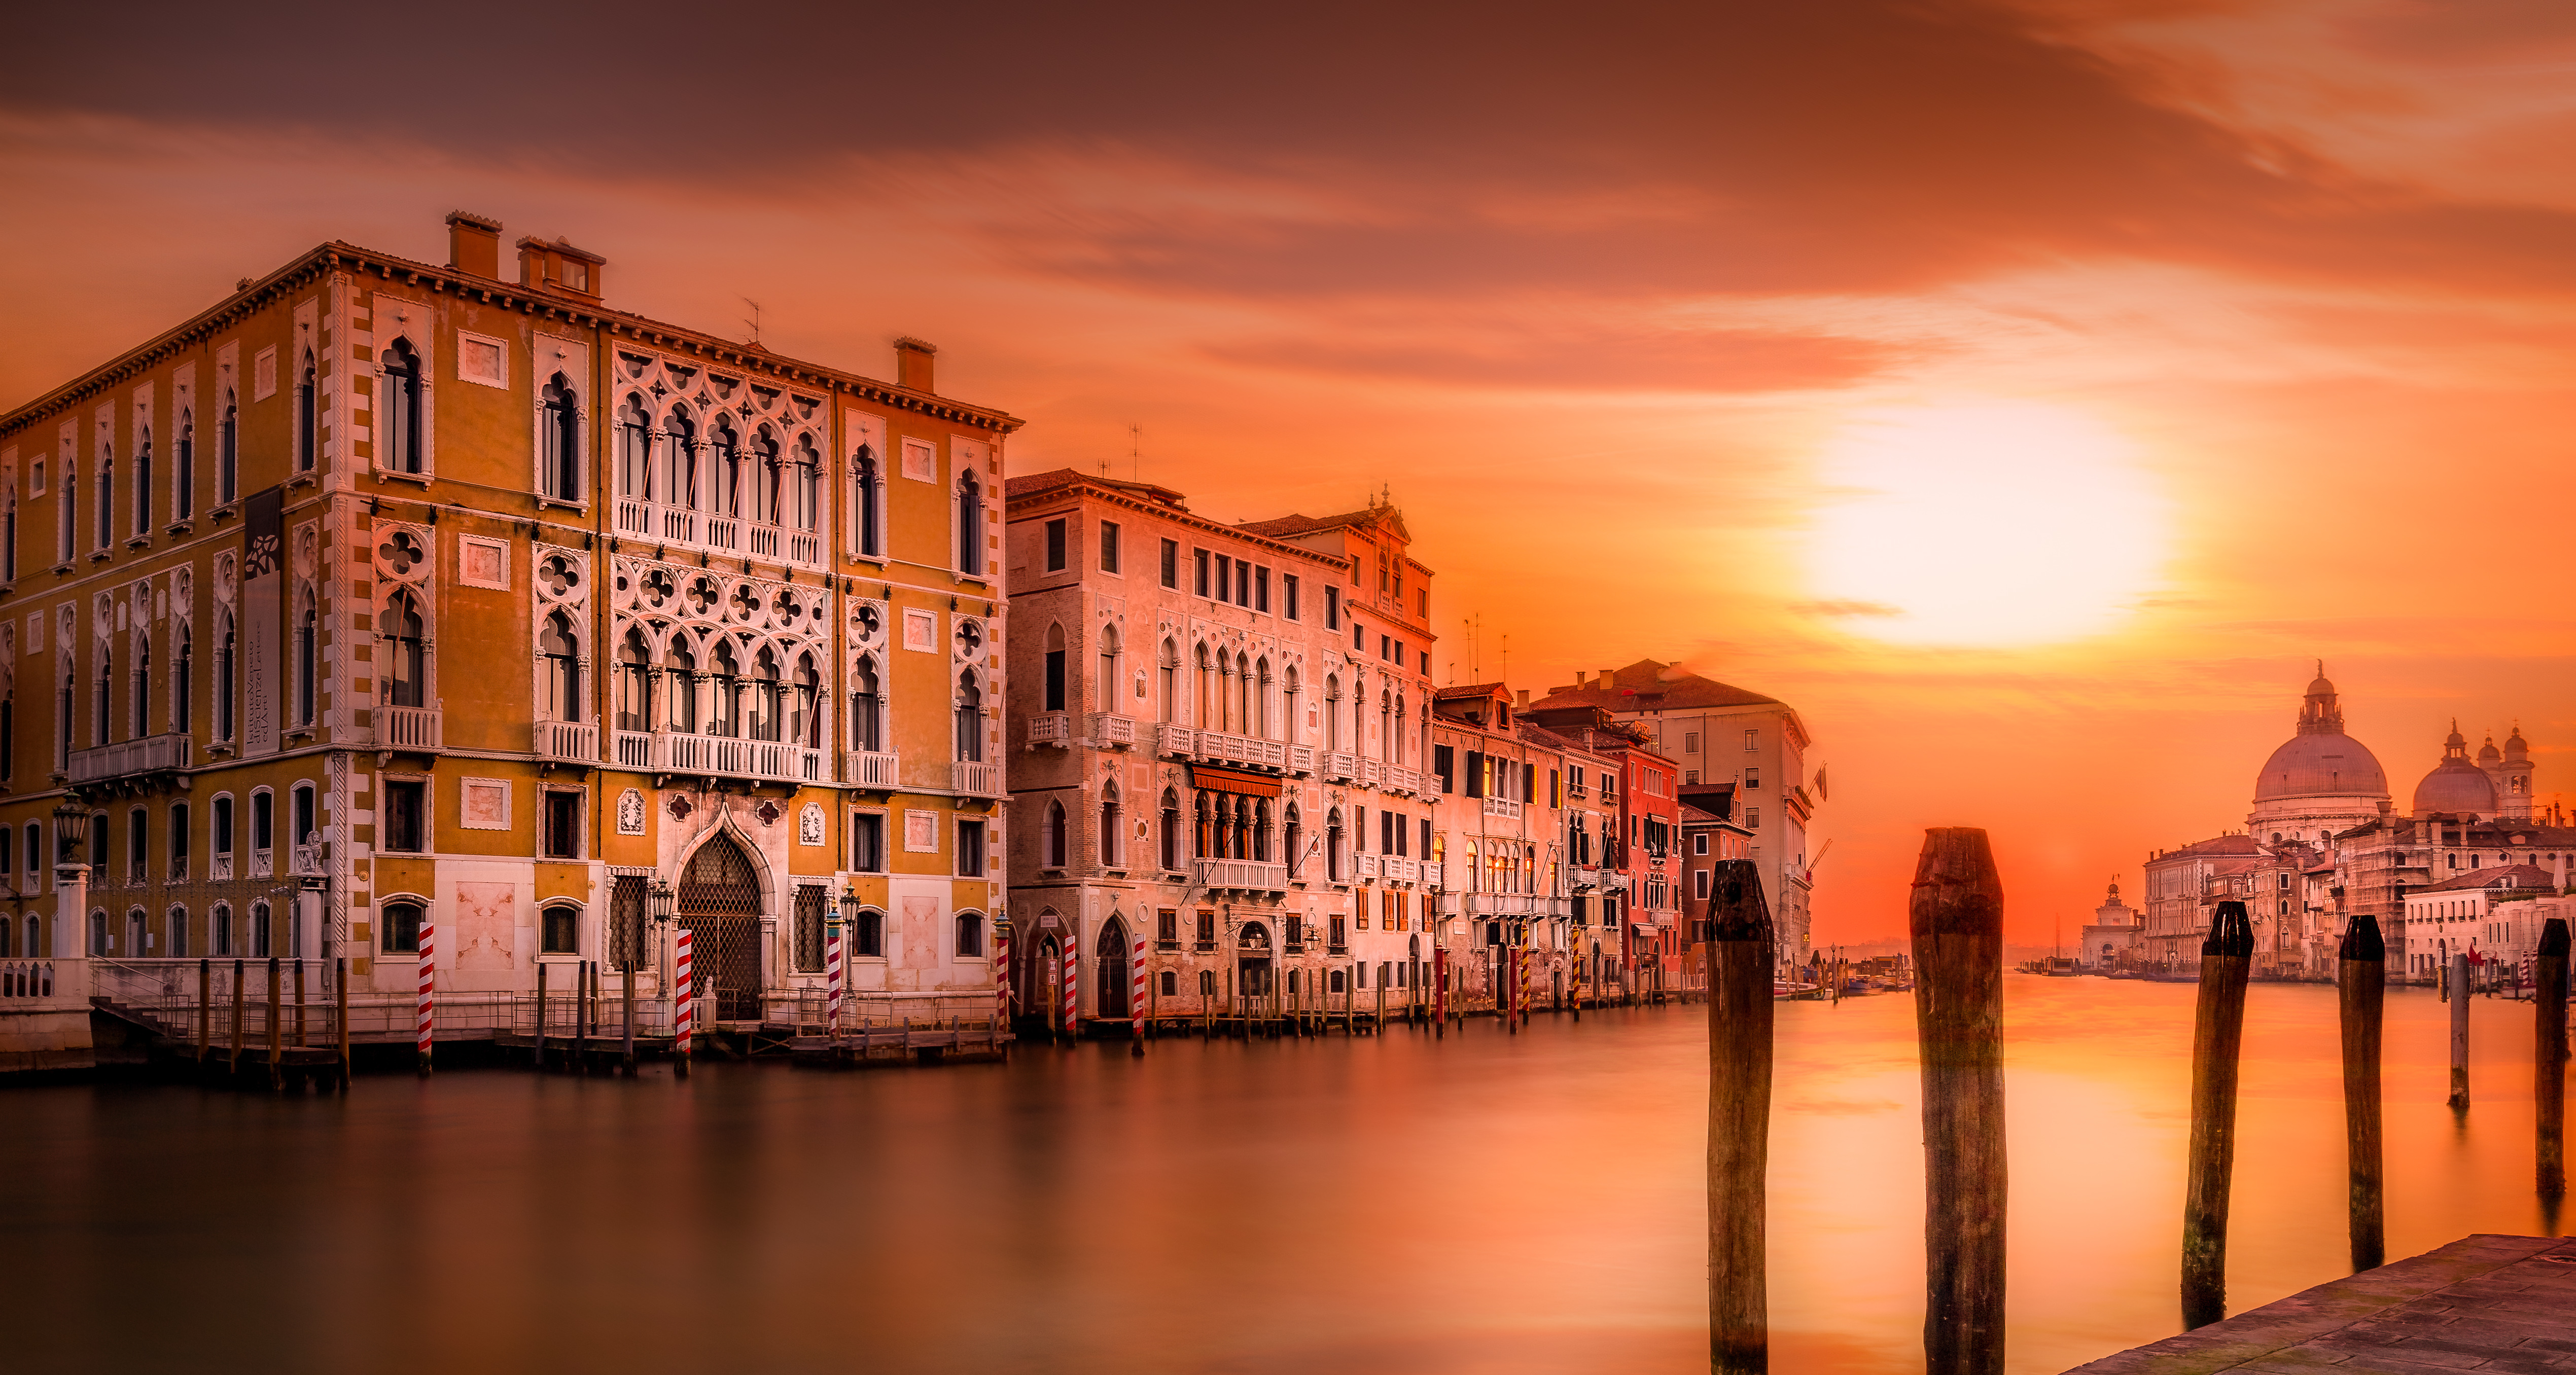 Venice Grand Canal Italy Building Architecture Sunset 5079x2712